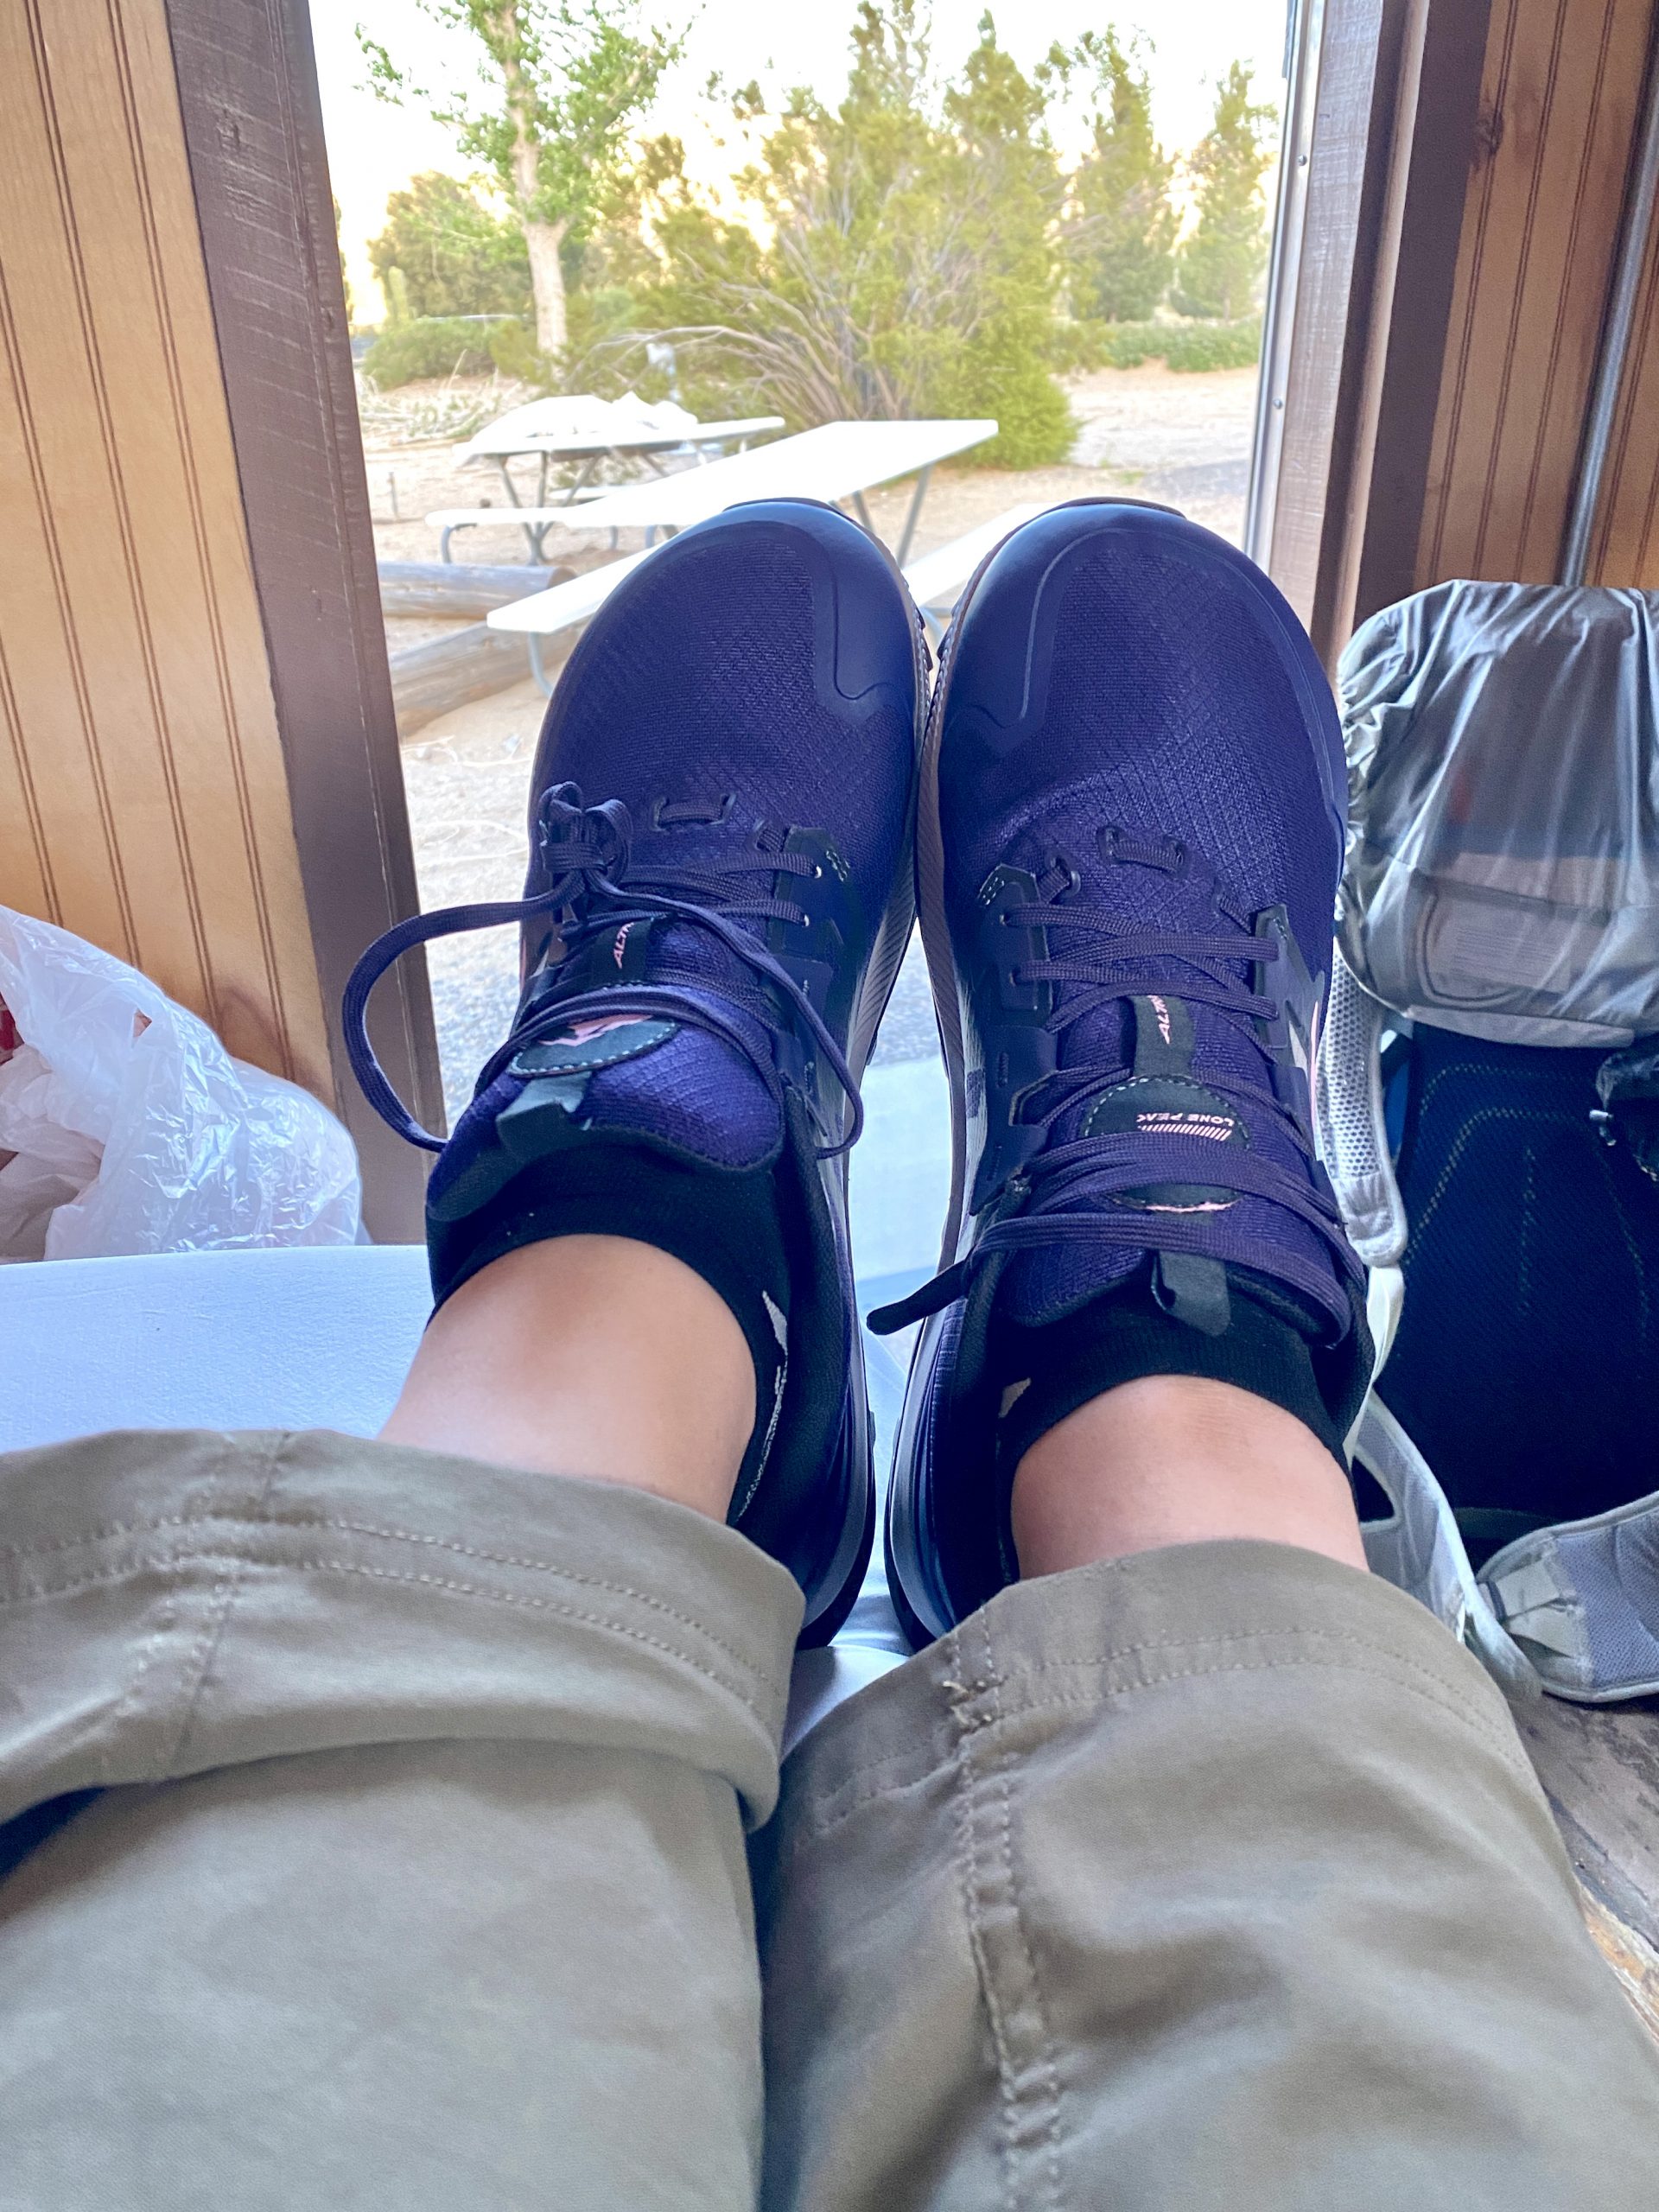 My new hiking shoes double rest day at stagecoach